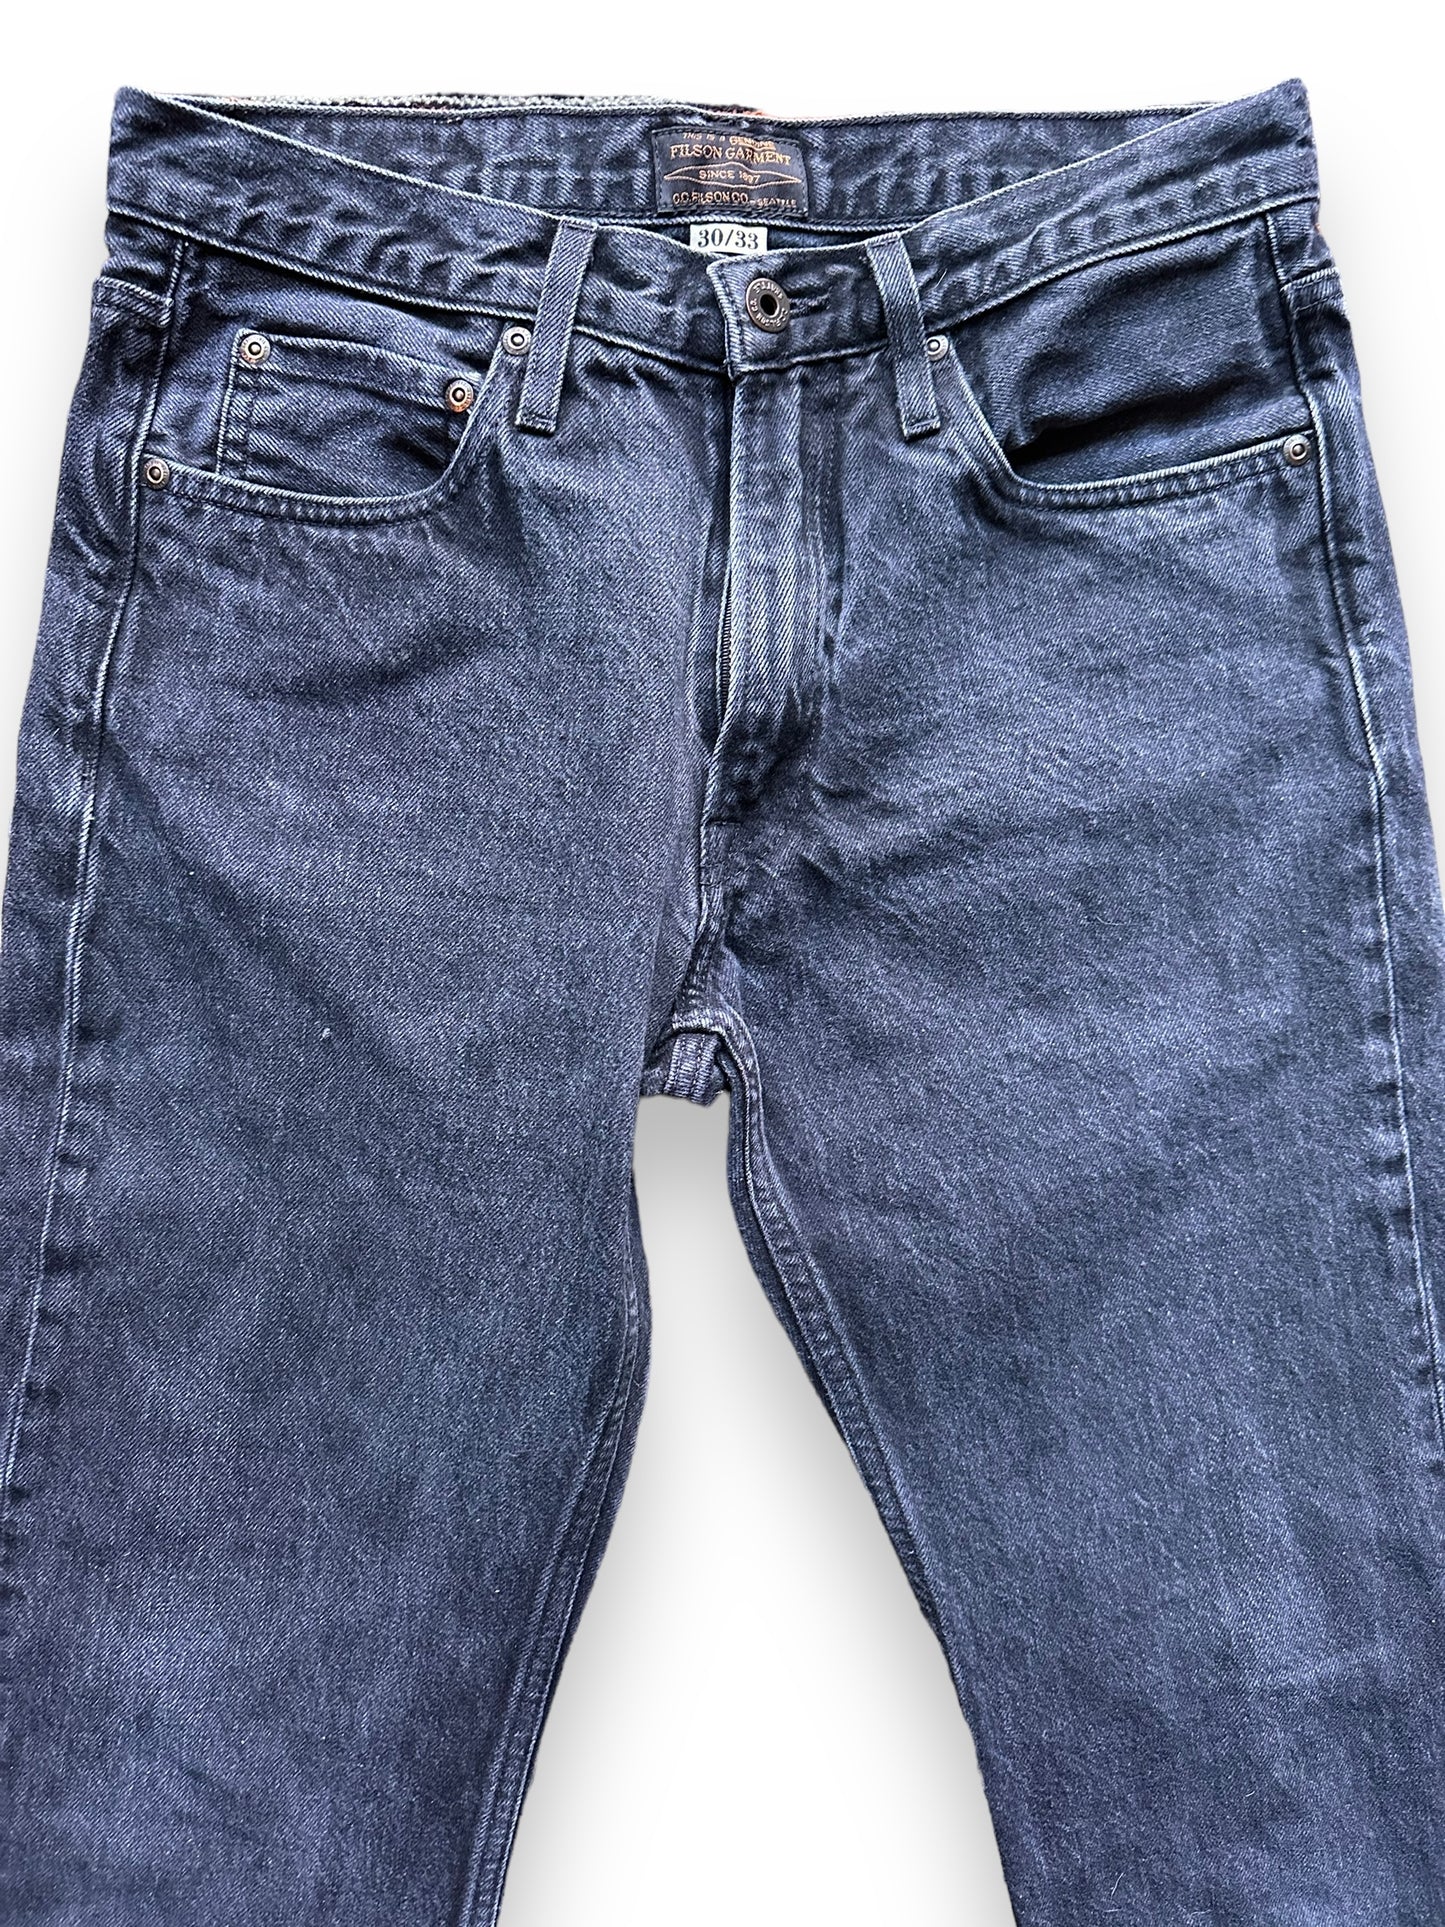 Upper Front View of Black Filson Jeans W31 |  Filson Dungarees | Filson Workwear Seattle